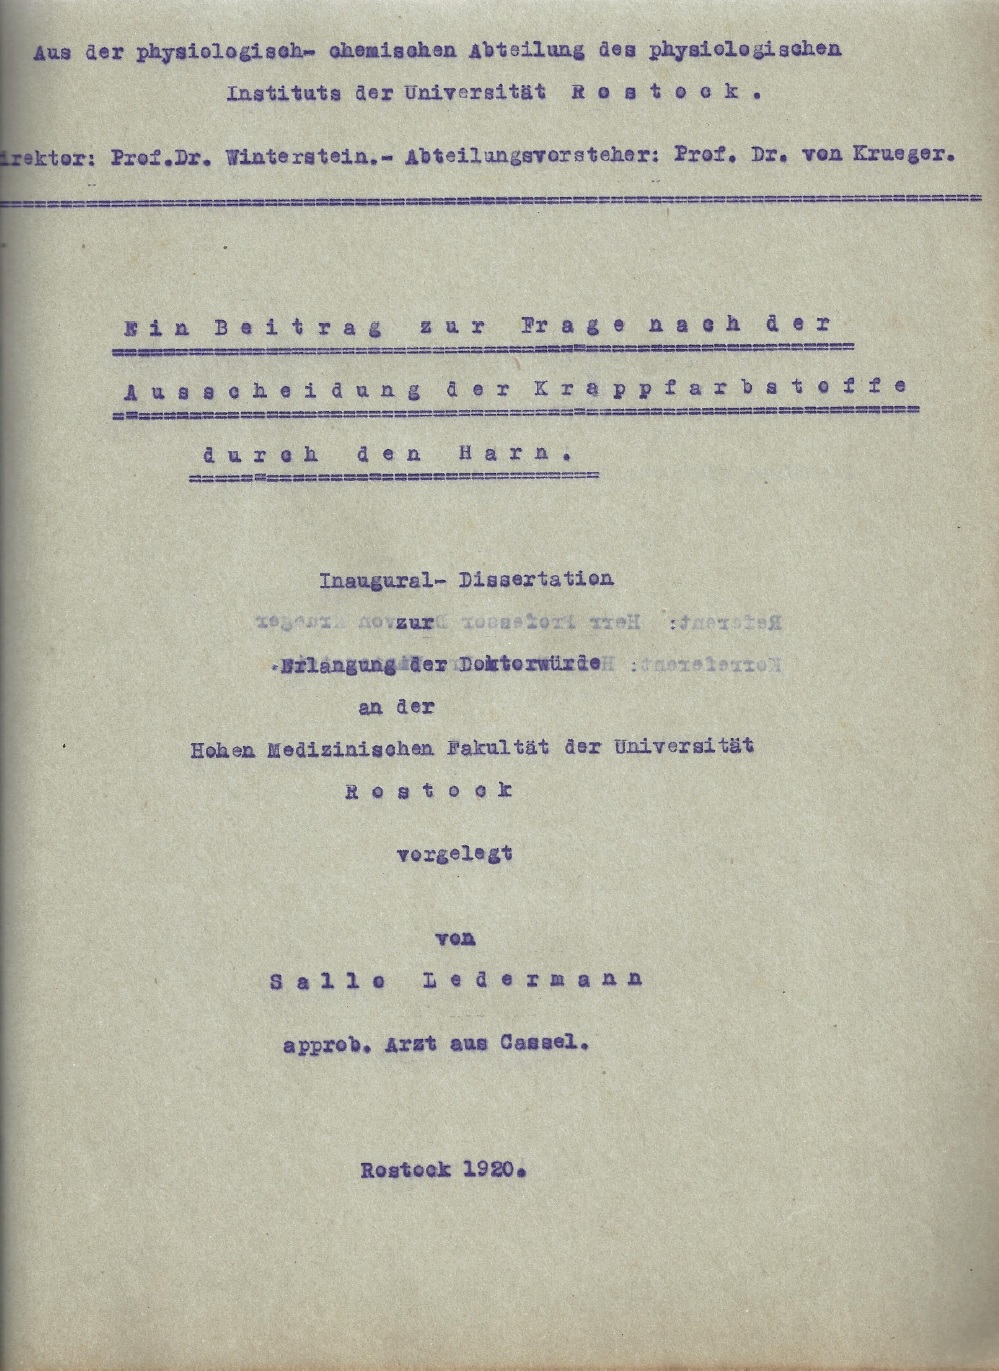 Dissertation 1920, doctoral file, Rostock University Archives, Faculty of Medicine, 89, files concerning the doctorate of the licensed physician Sallo Ledermann from Cassel